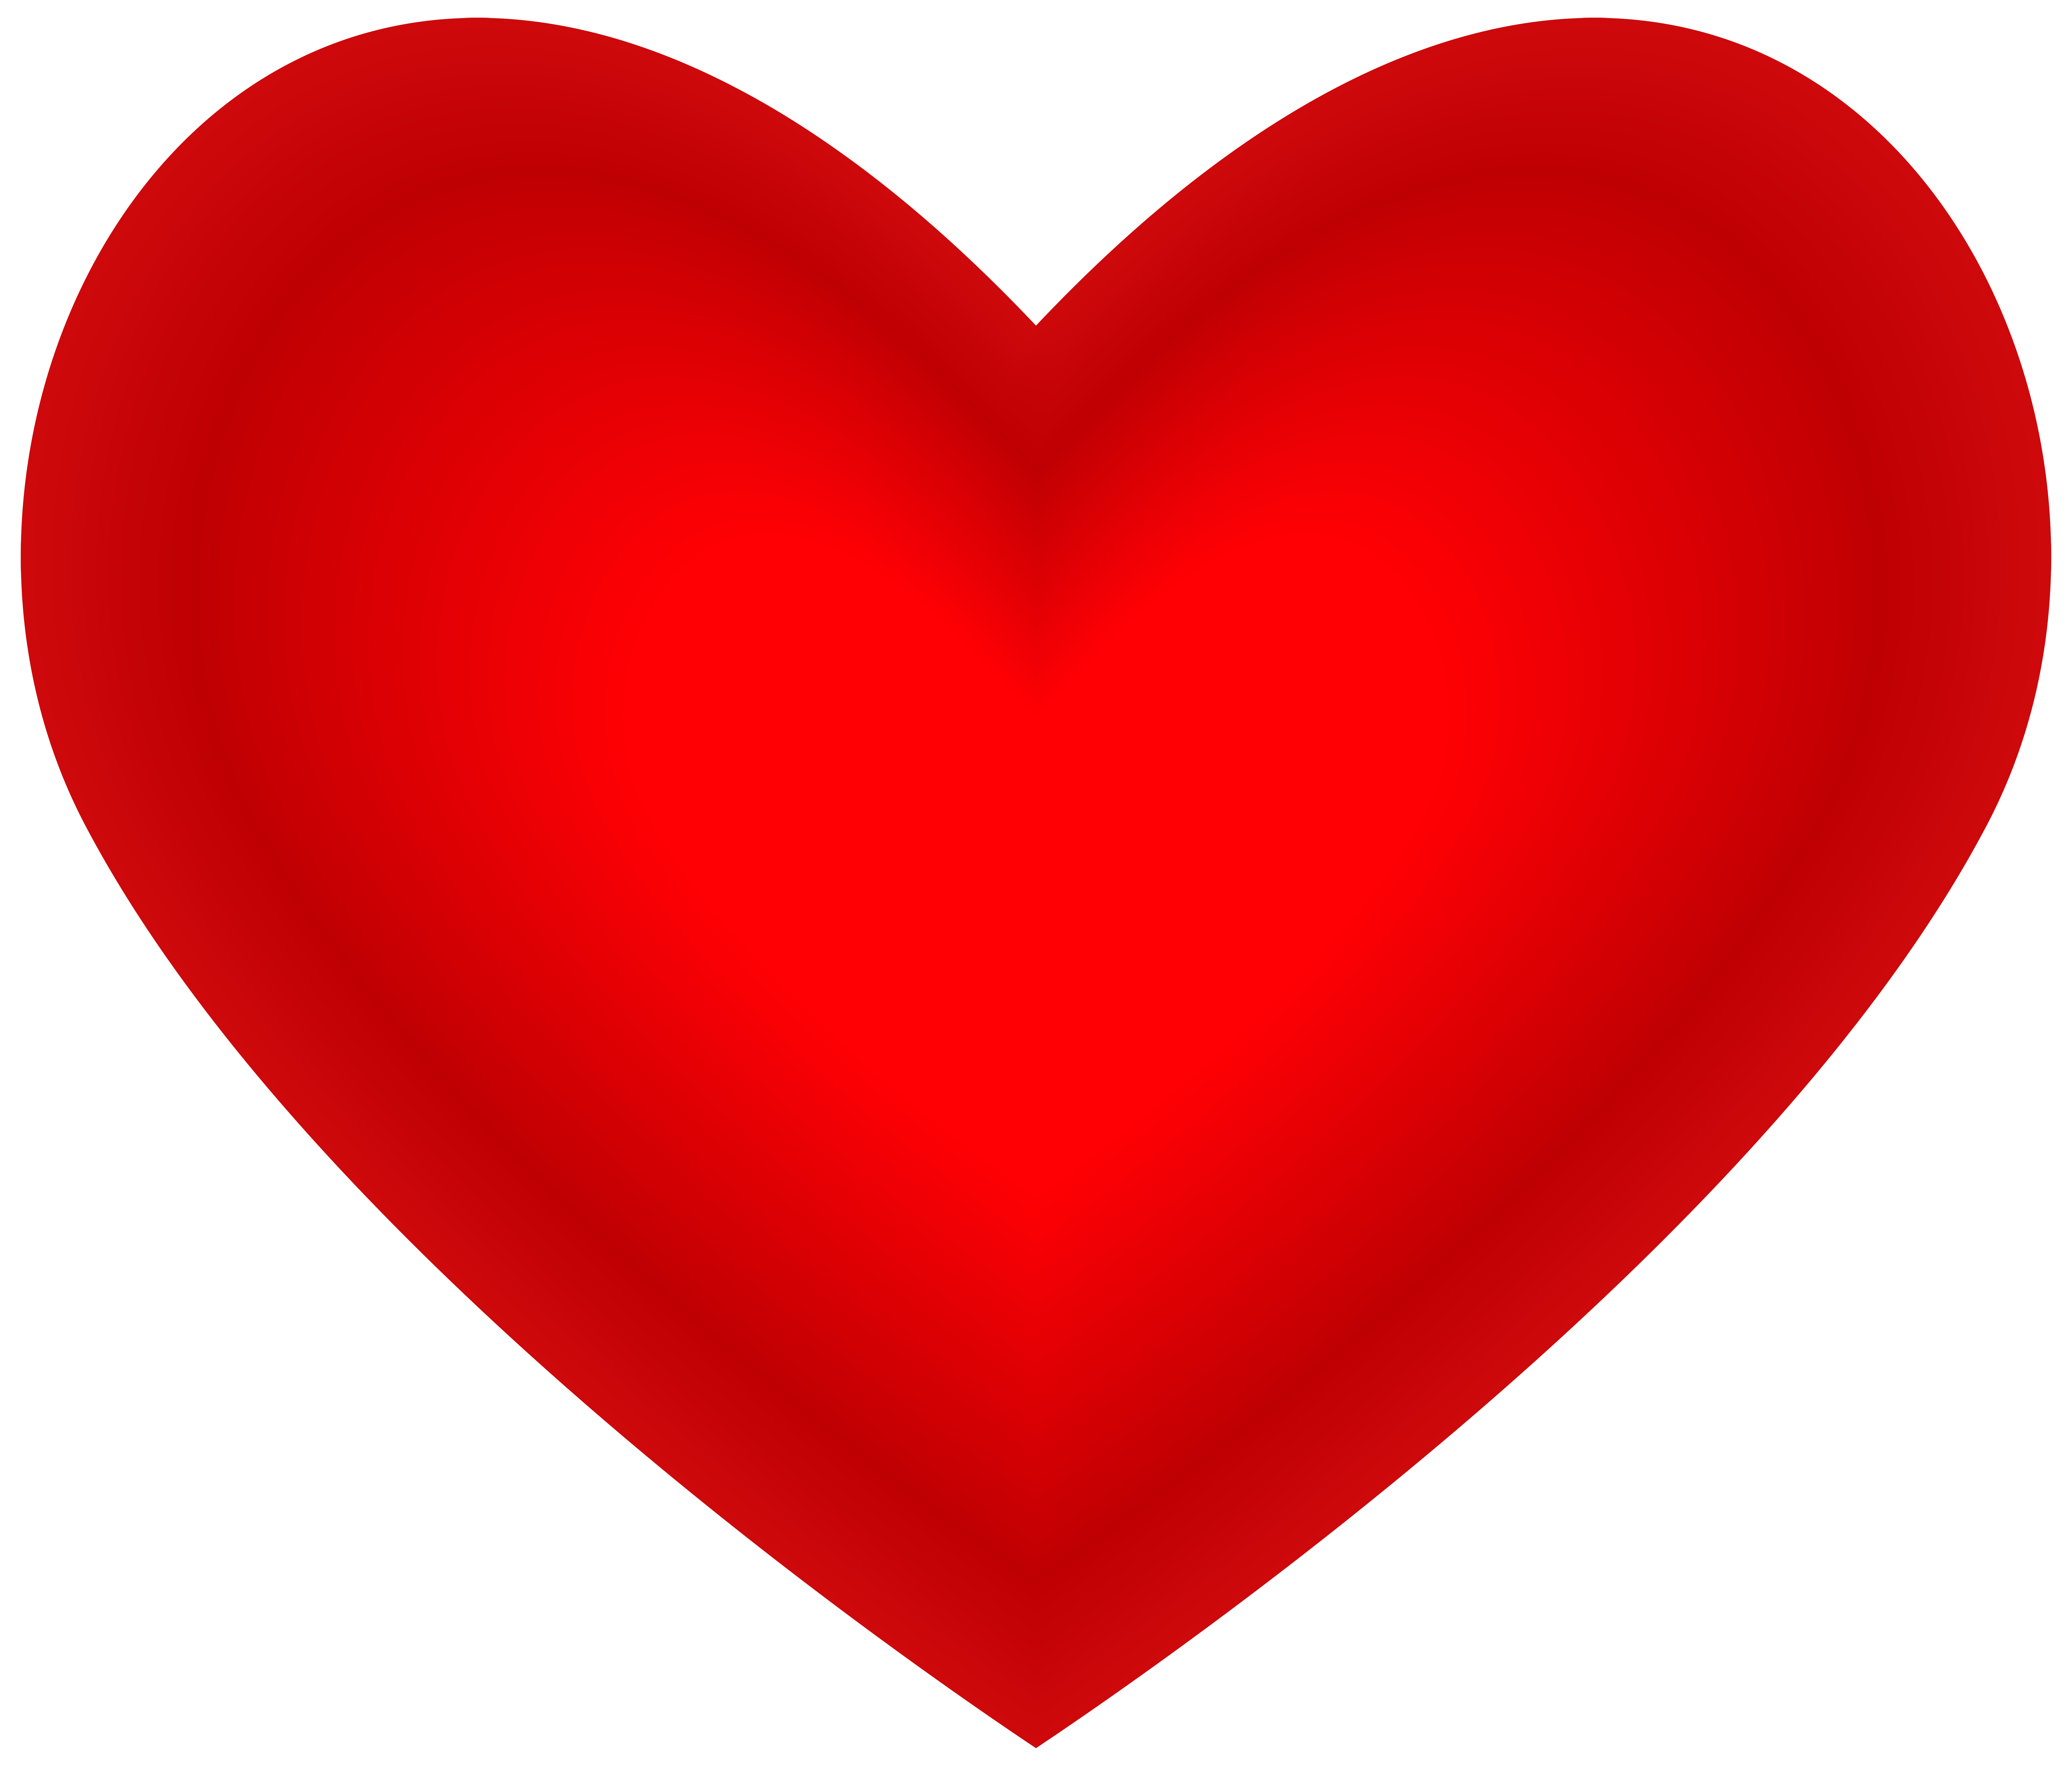 Red heart image gallery. Hearts transparent png